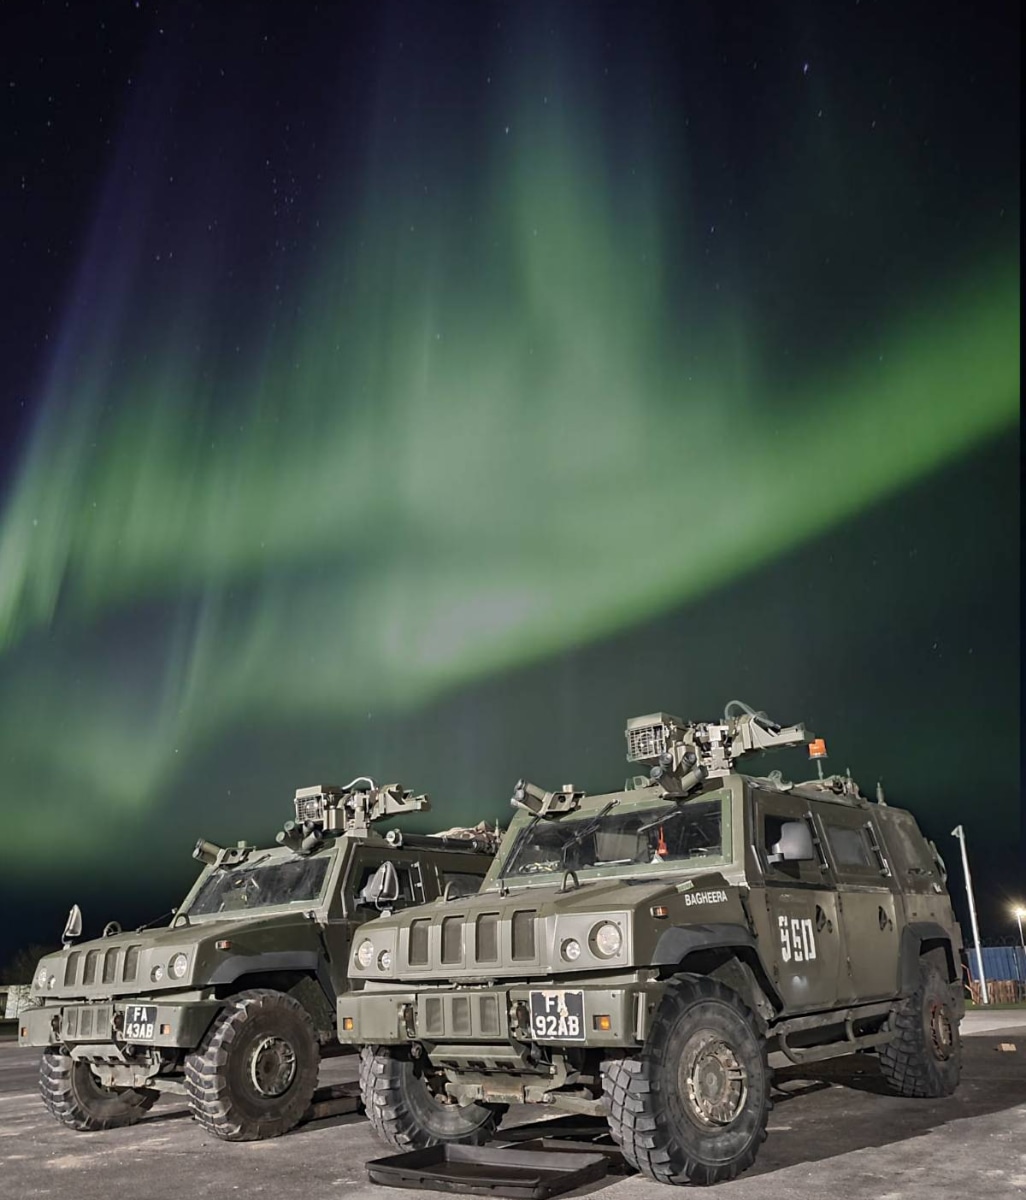 After a tough few weeks on exercise our vehicles rest for a moment of peace under Estonia's beautiful night sky. Ready for whatever comes next @kaitseministeerium @keitsevagi @ukinestonia @UKNATO @nato @defenceops #eesti #estonia🇪🇪 #strongertogether #allies #kevadtorm